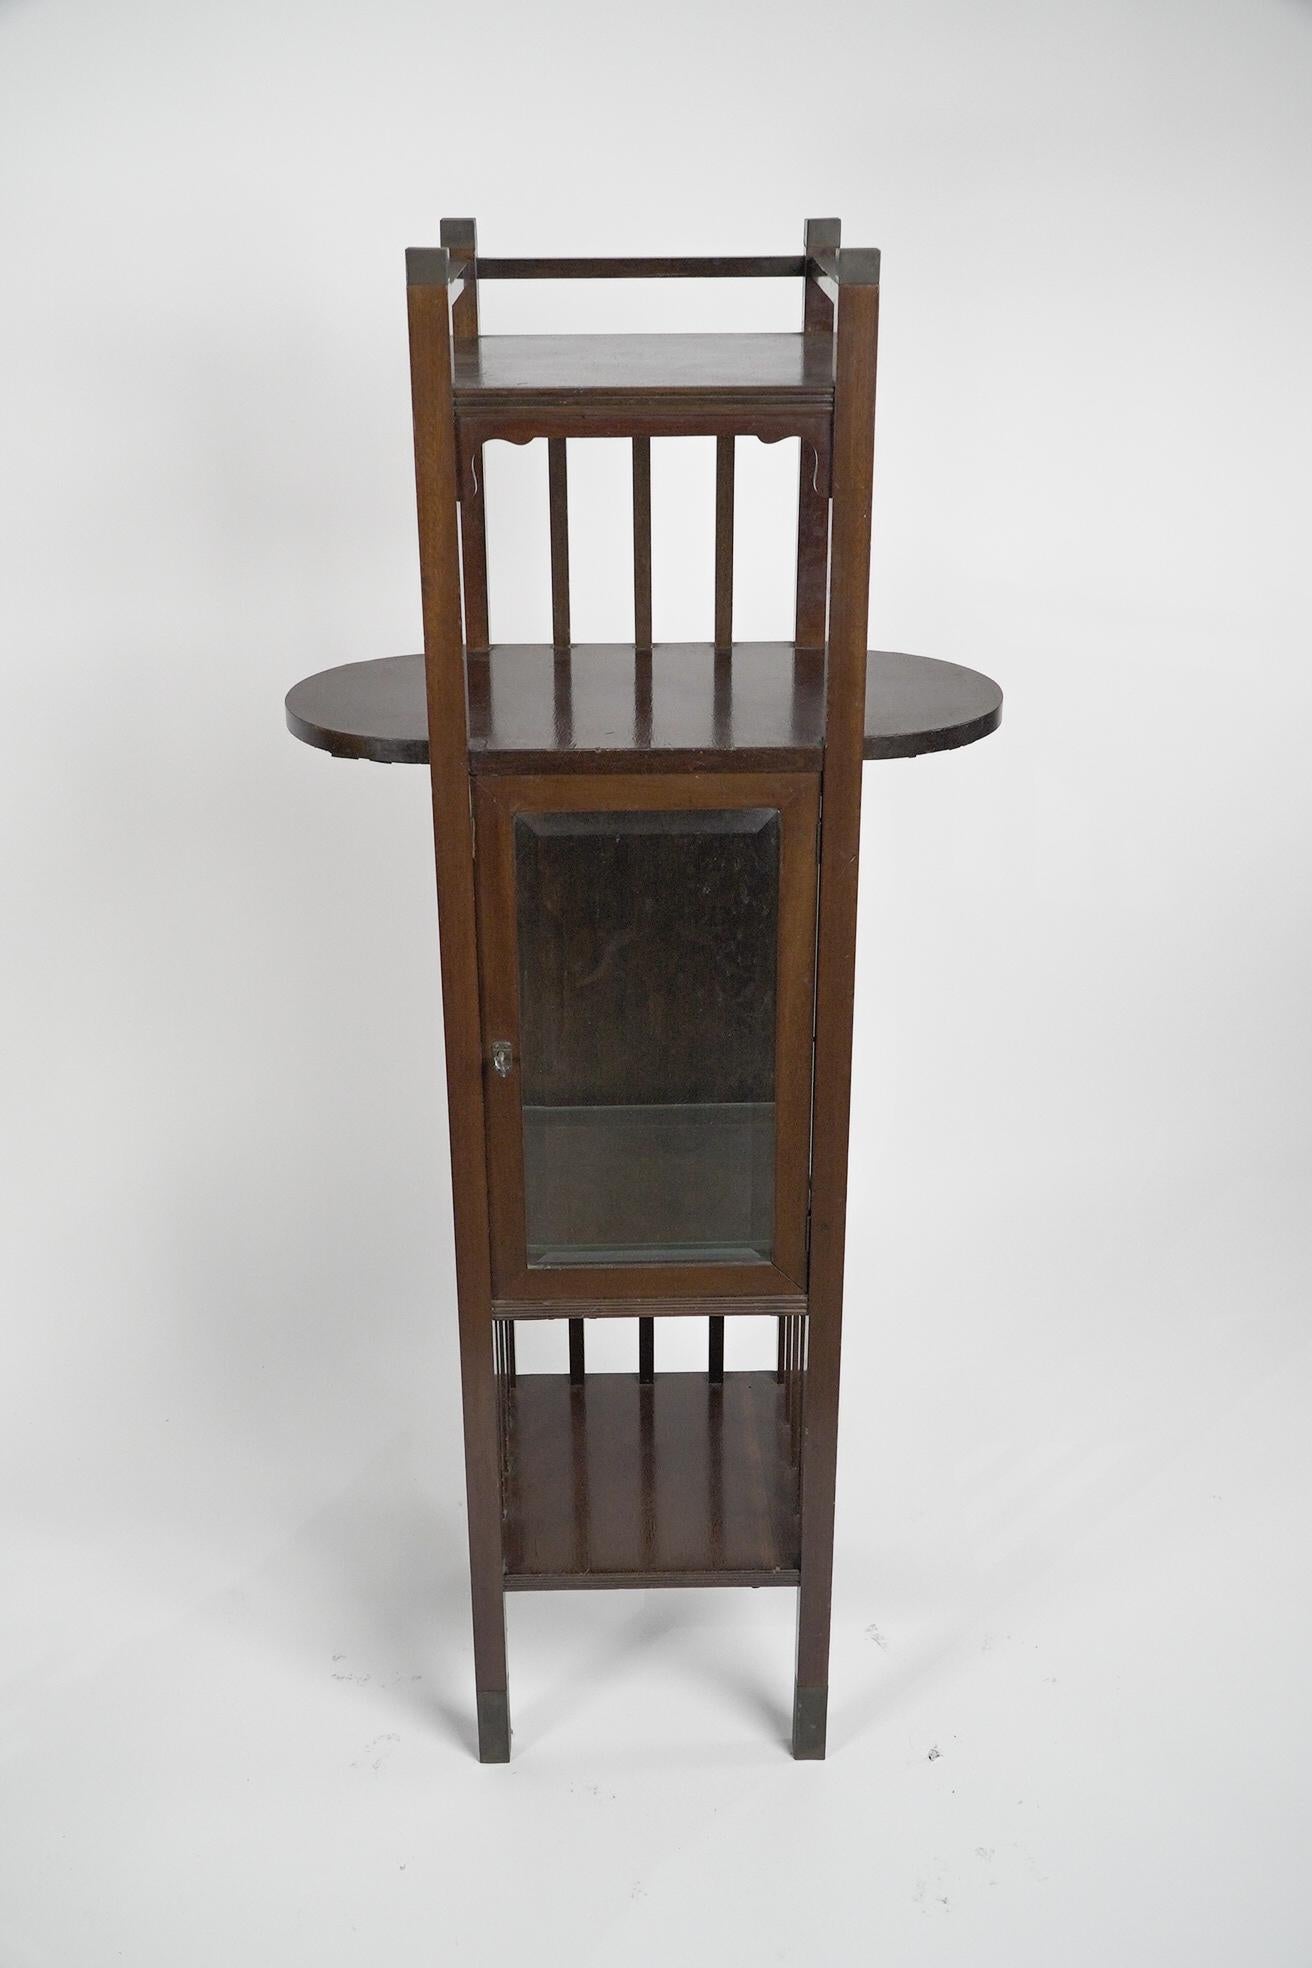 An Anglo-Japanese style Mahogany side cabinet of slender form with upper extending display wings, a beveled glass door, and glass sides, a sign of good quality, standing on brass sabot feet.
